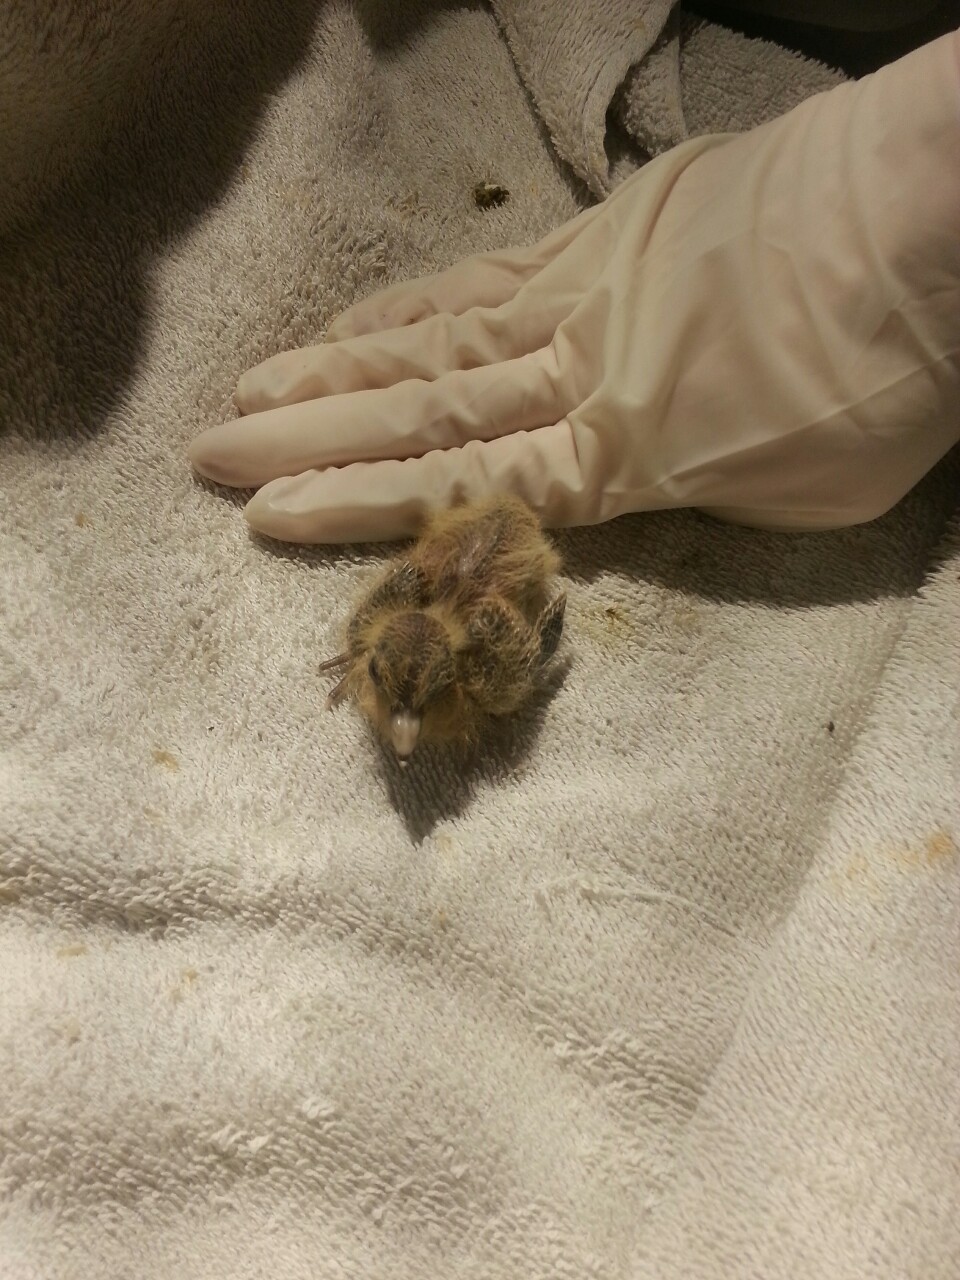 huffiestrikes:Look at the cute baby pigeon i found today and im taking care of Its